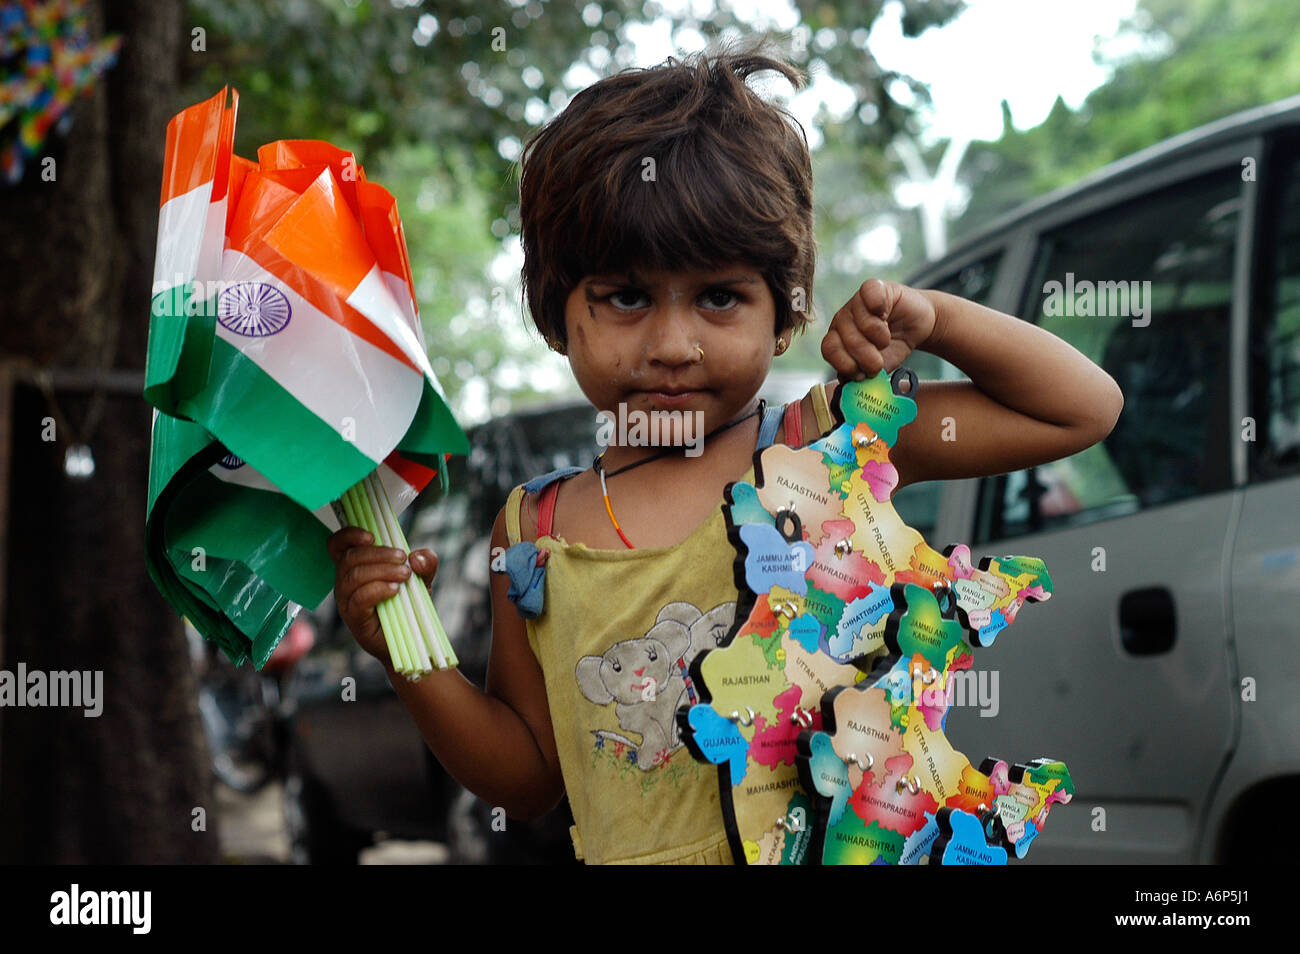 Child labour children working young girl working selling Indian flags ...